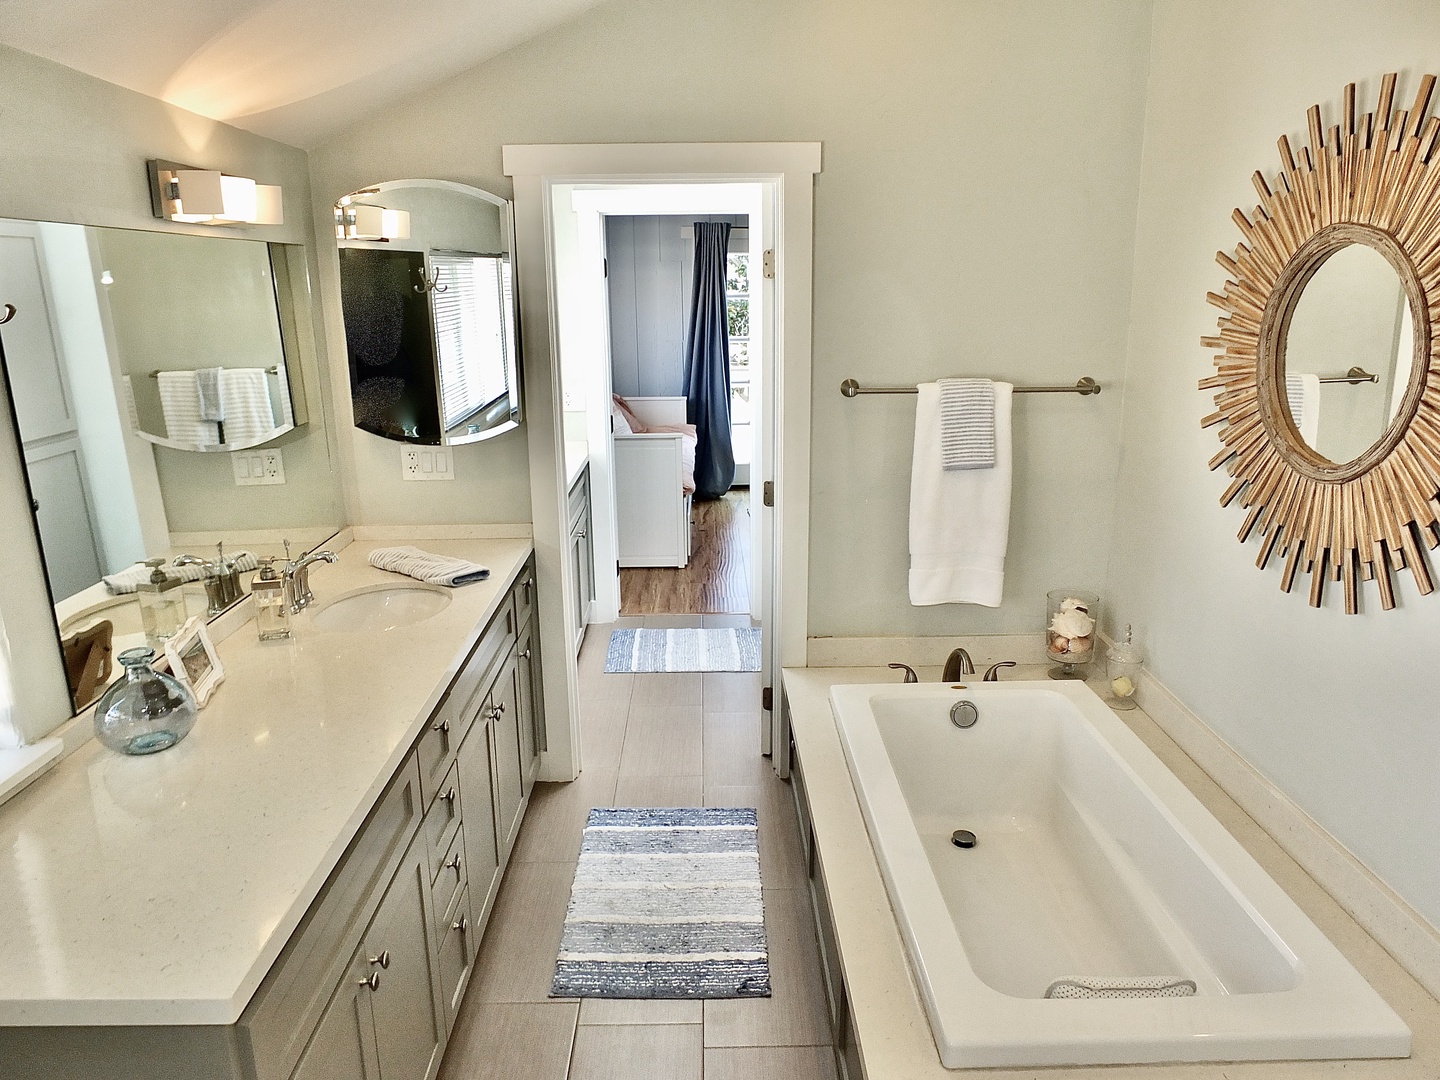 Dual vanities, a glass shower, & luxe soaking tub await in this full bath